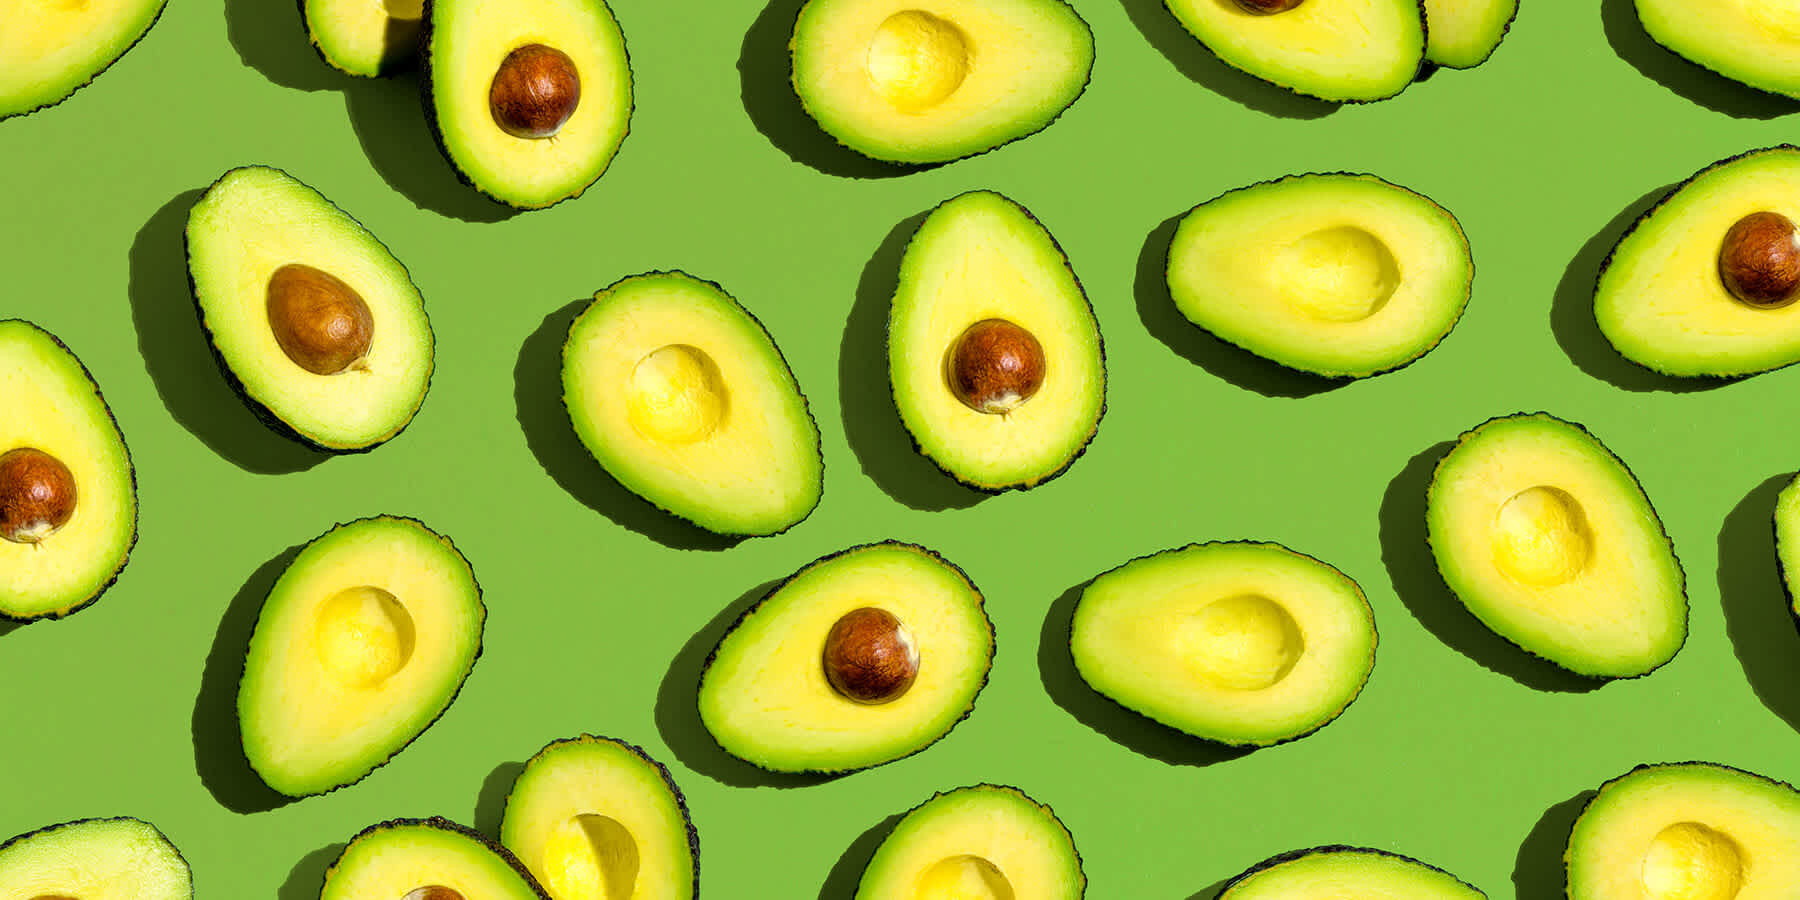 Several avocados against a green background to represent best high fiber, low carb foods